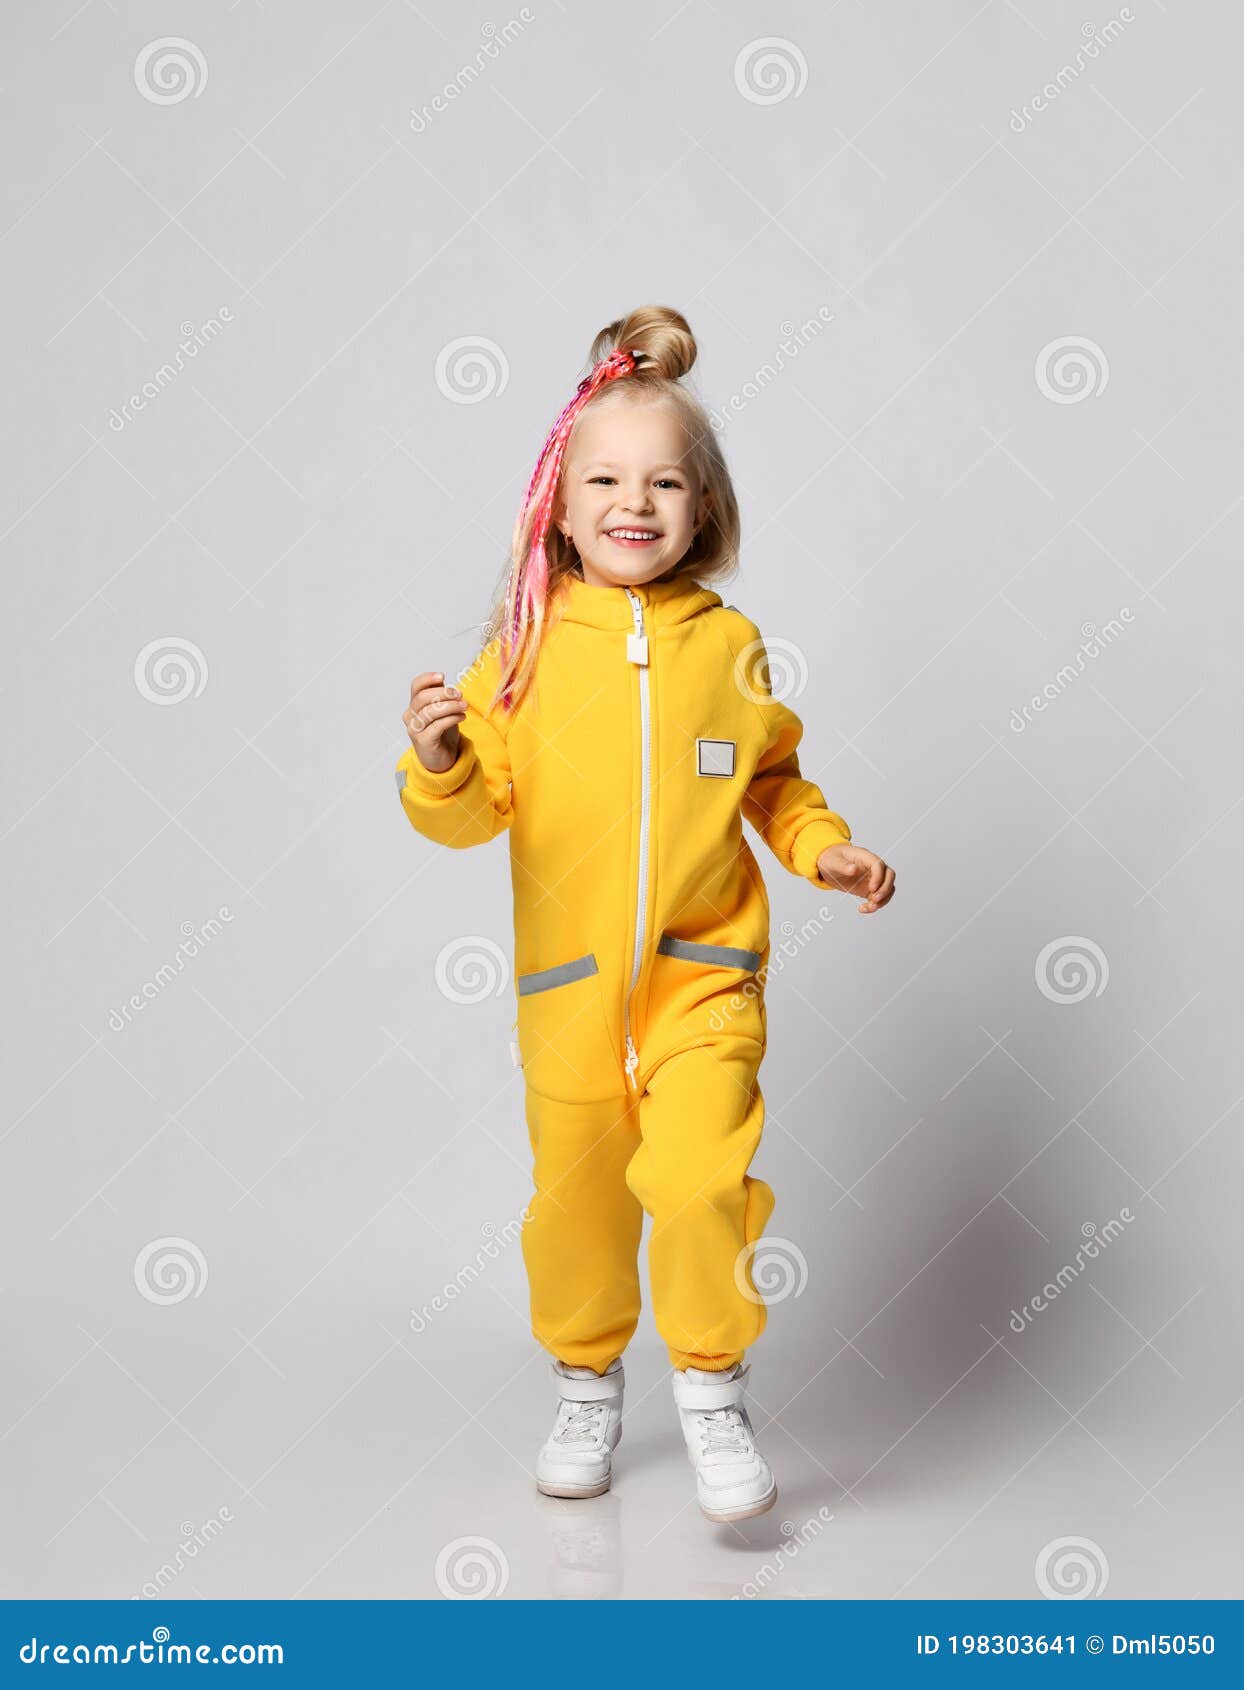 Cheerful Blonde Kid Baby Girl with Colorful Braids in Stylish Yellow  Jumpsuit and Sneakers Runs Jumps Towards Camera Stock Image - Image of  beauty, cool: 198303641